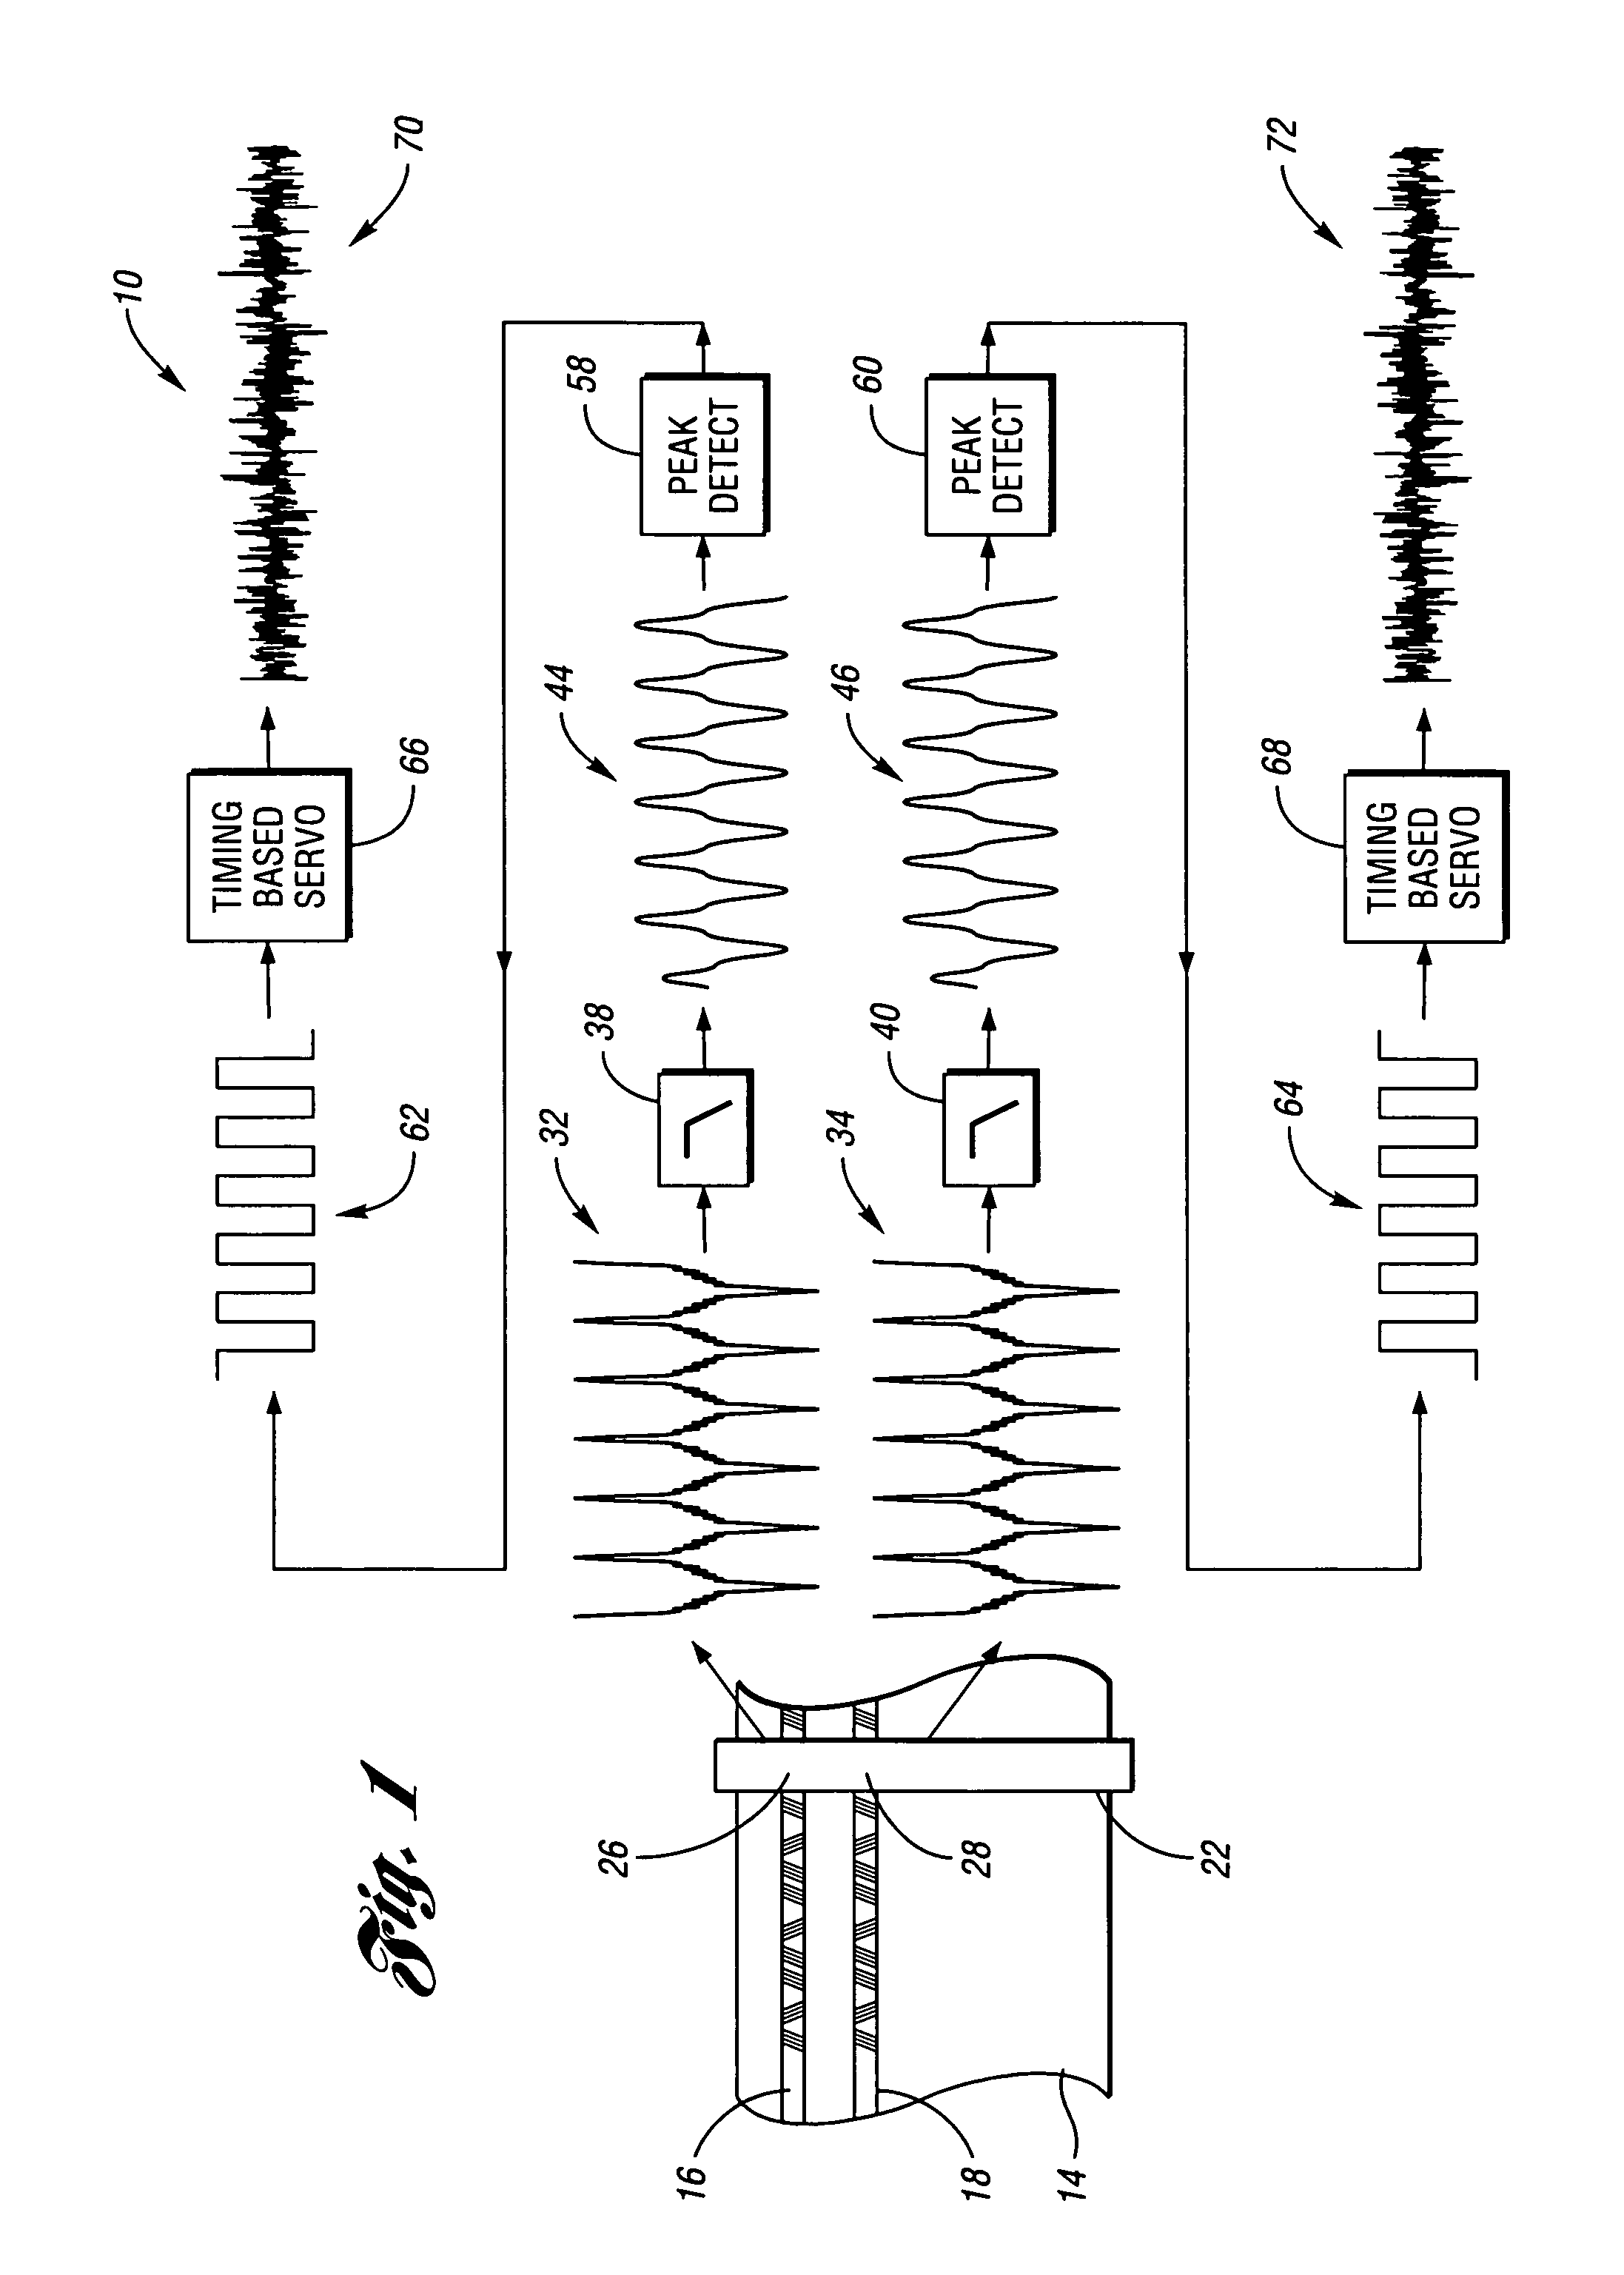 Method and system of measurement and optimization of noise in servo systems